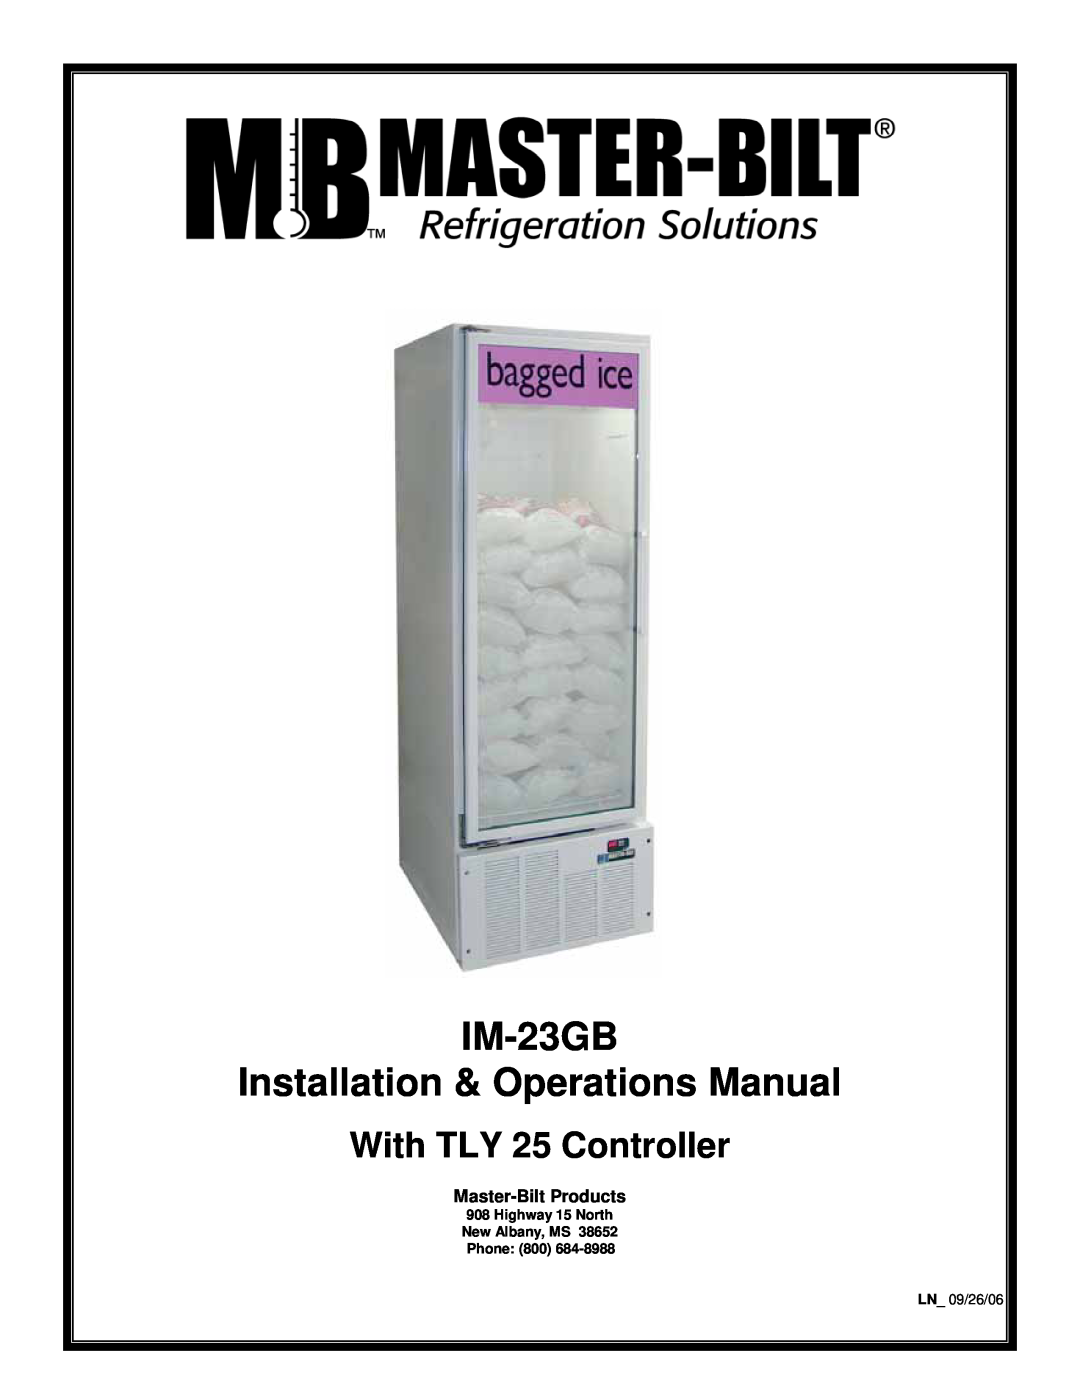 Master Bilt manual IM-23GB Installation & Operations Manual, With TLY 25 Controller, LN 09/26/06 